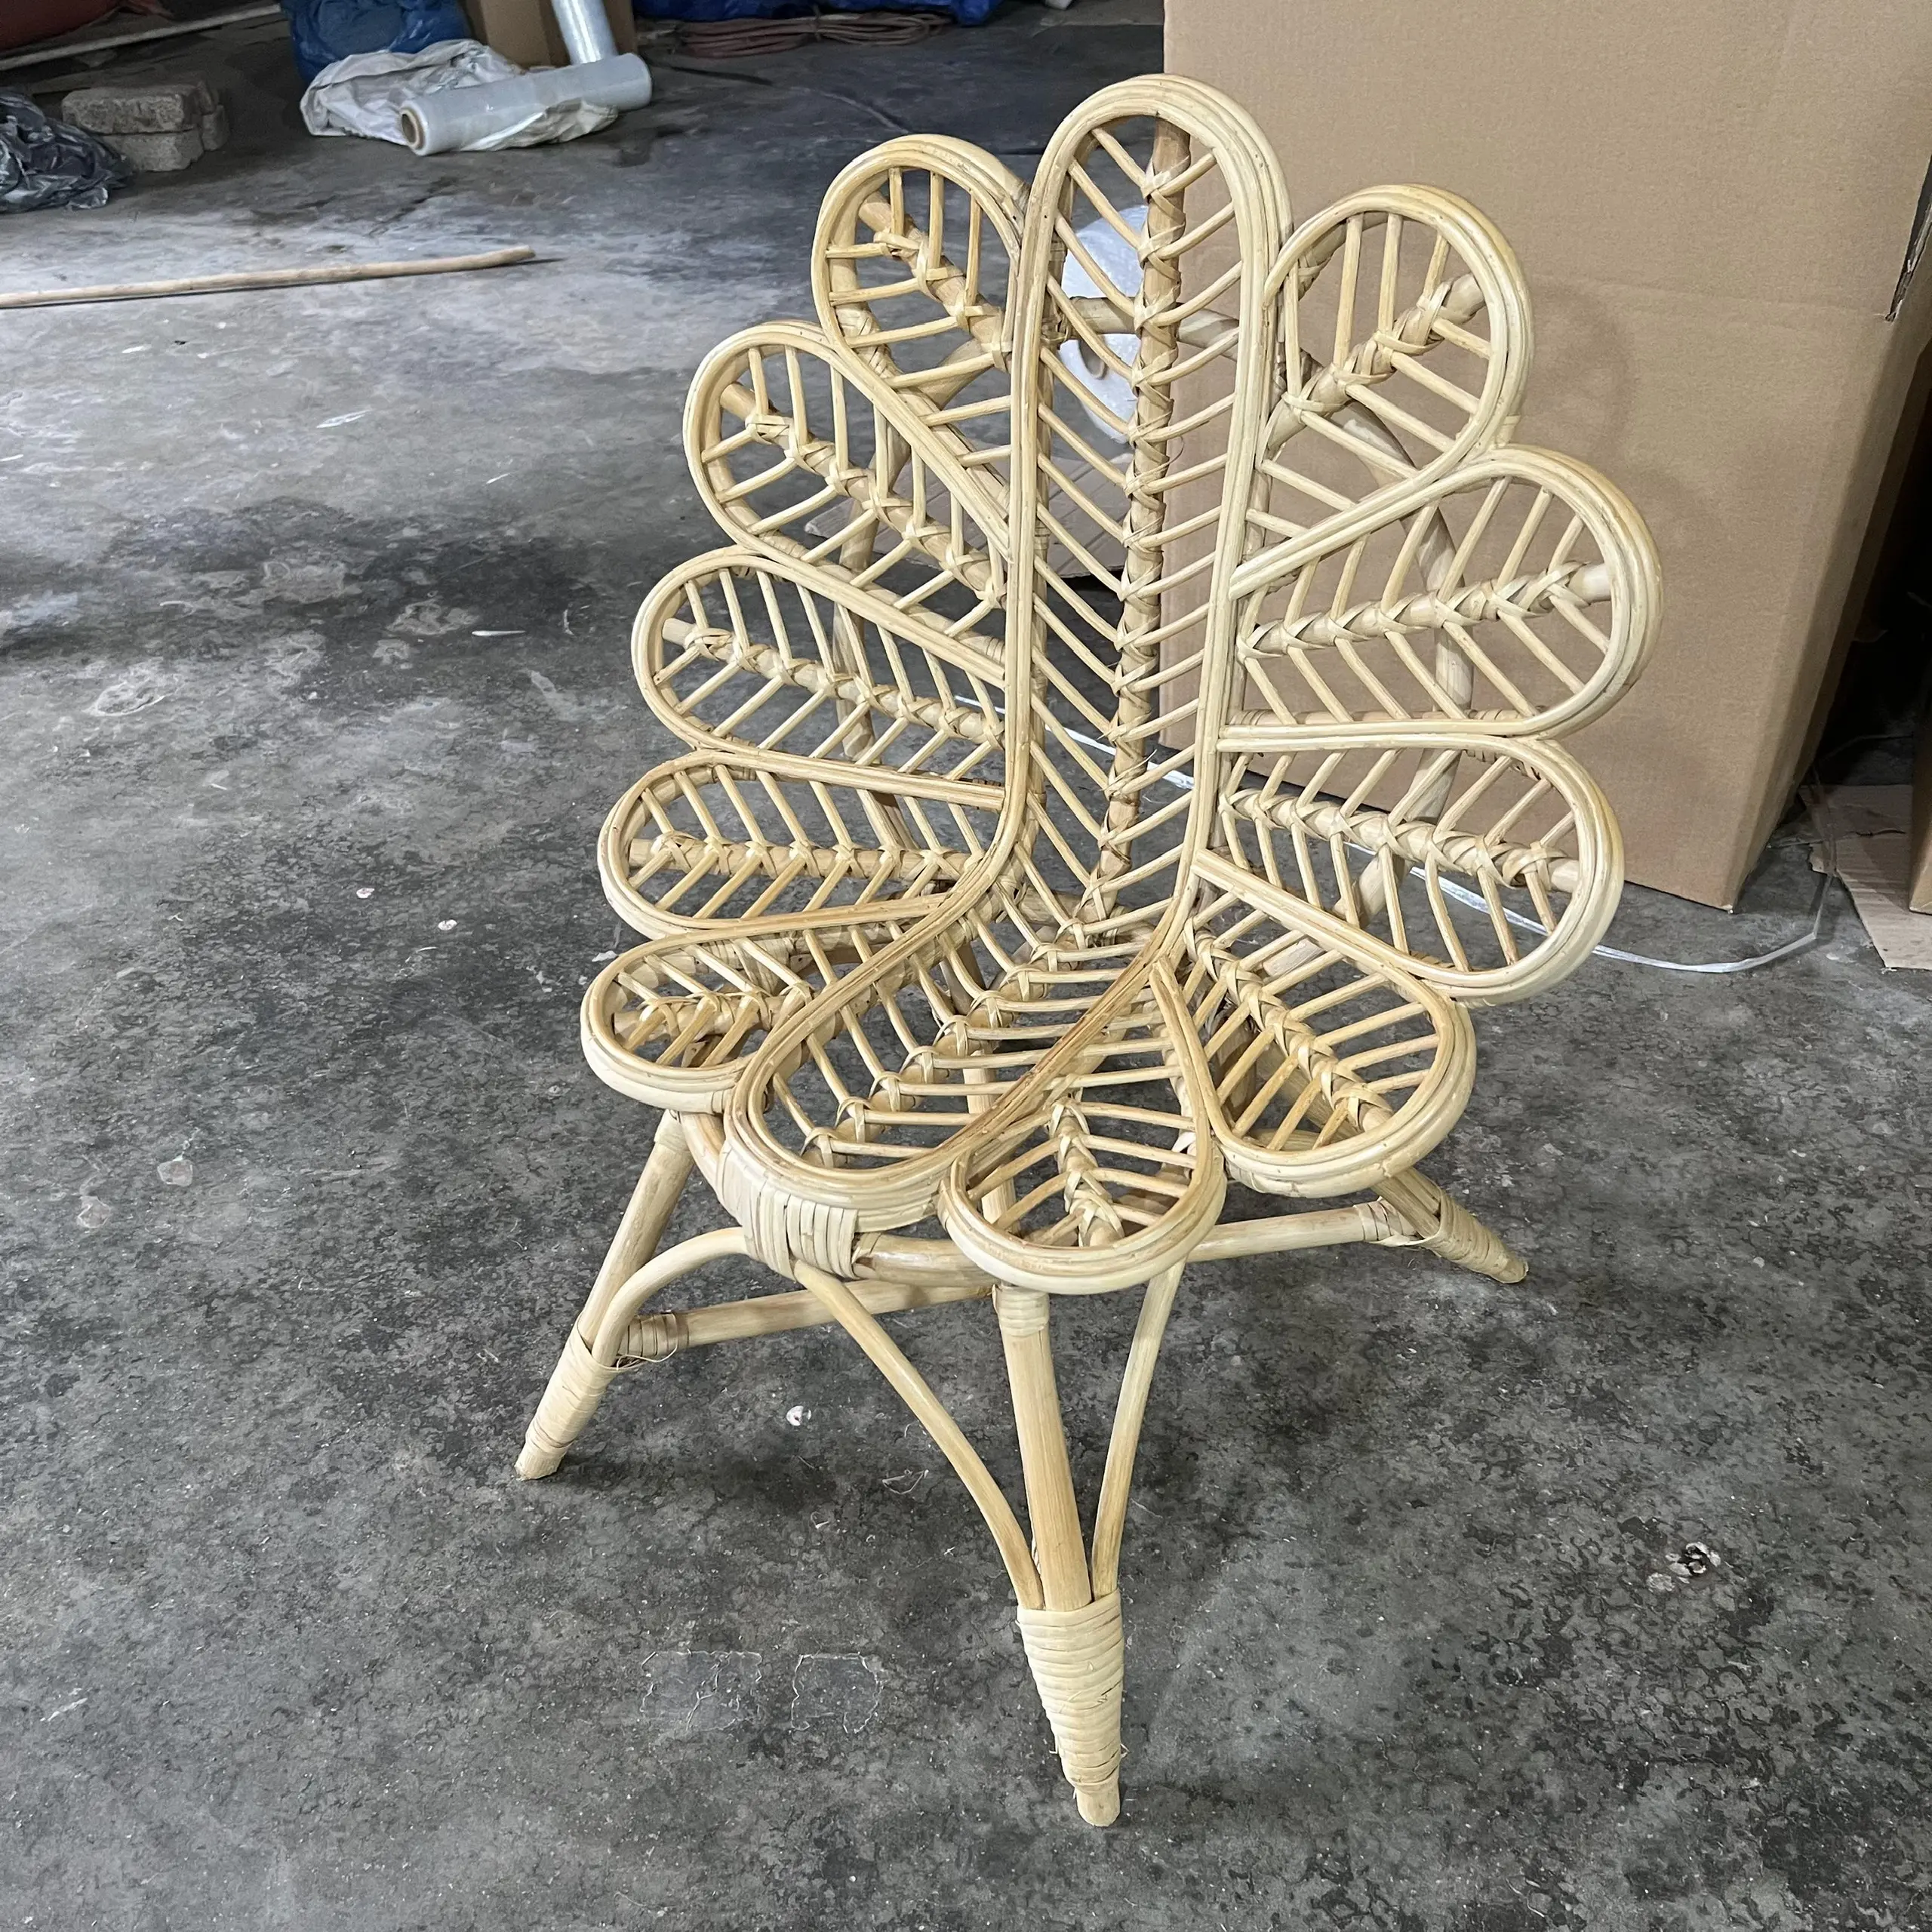 New style natural rattan chair for kid furniture handmade in Vietnam